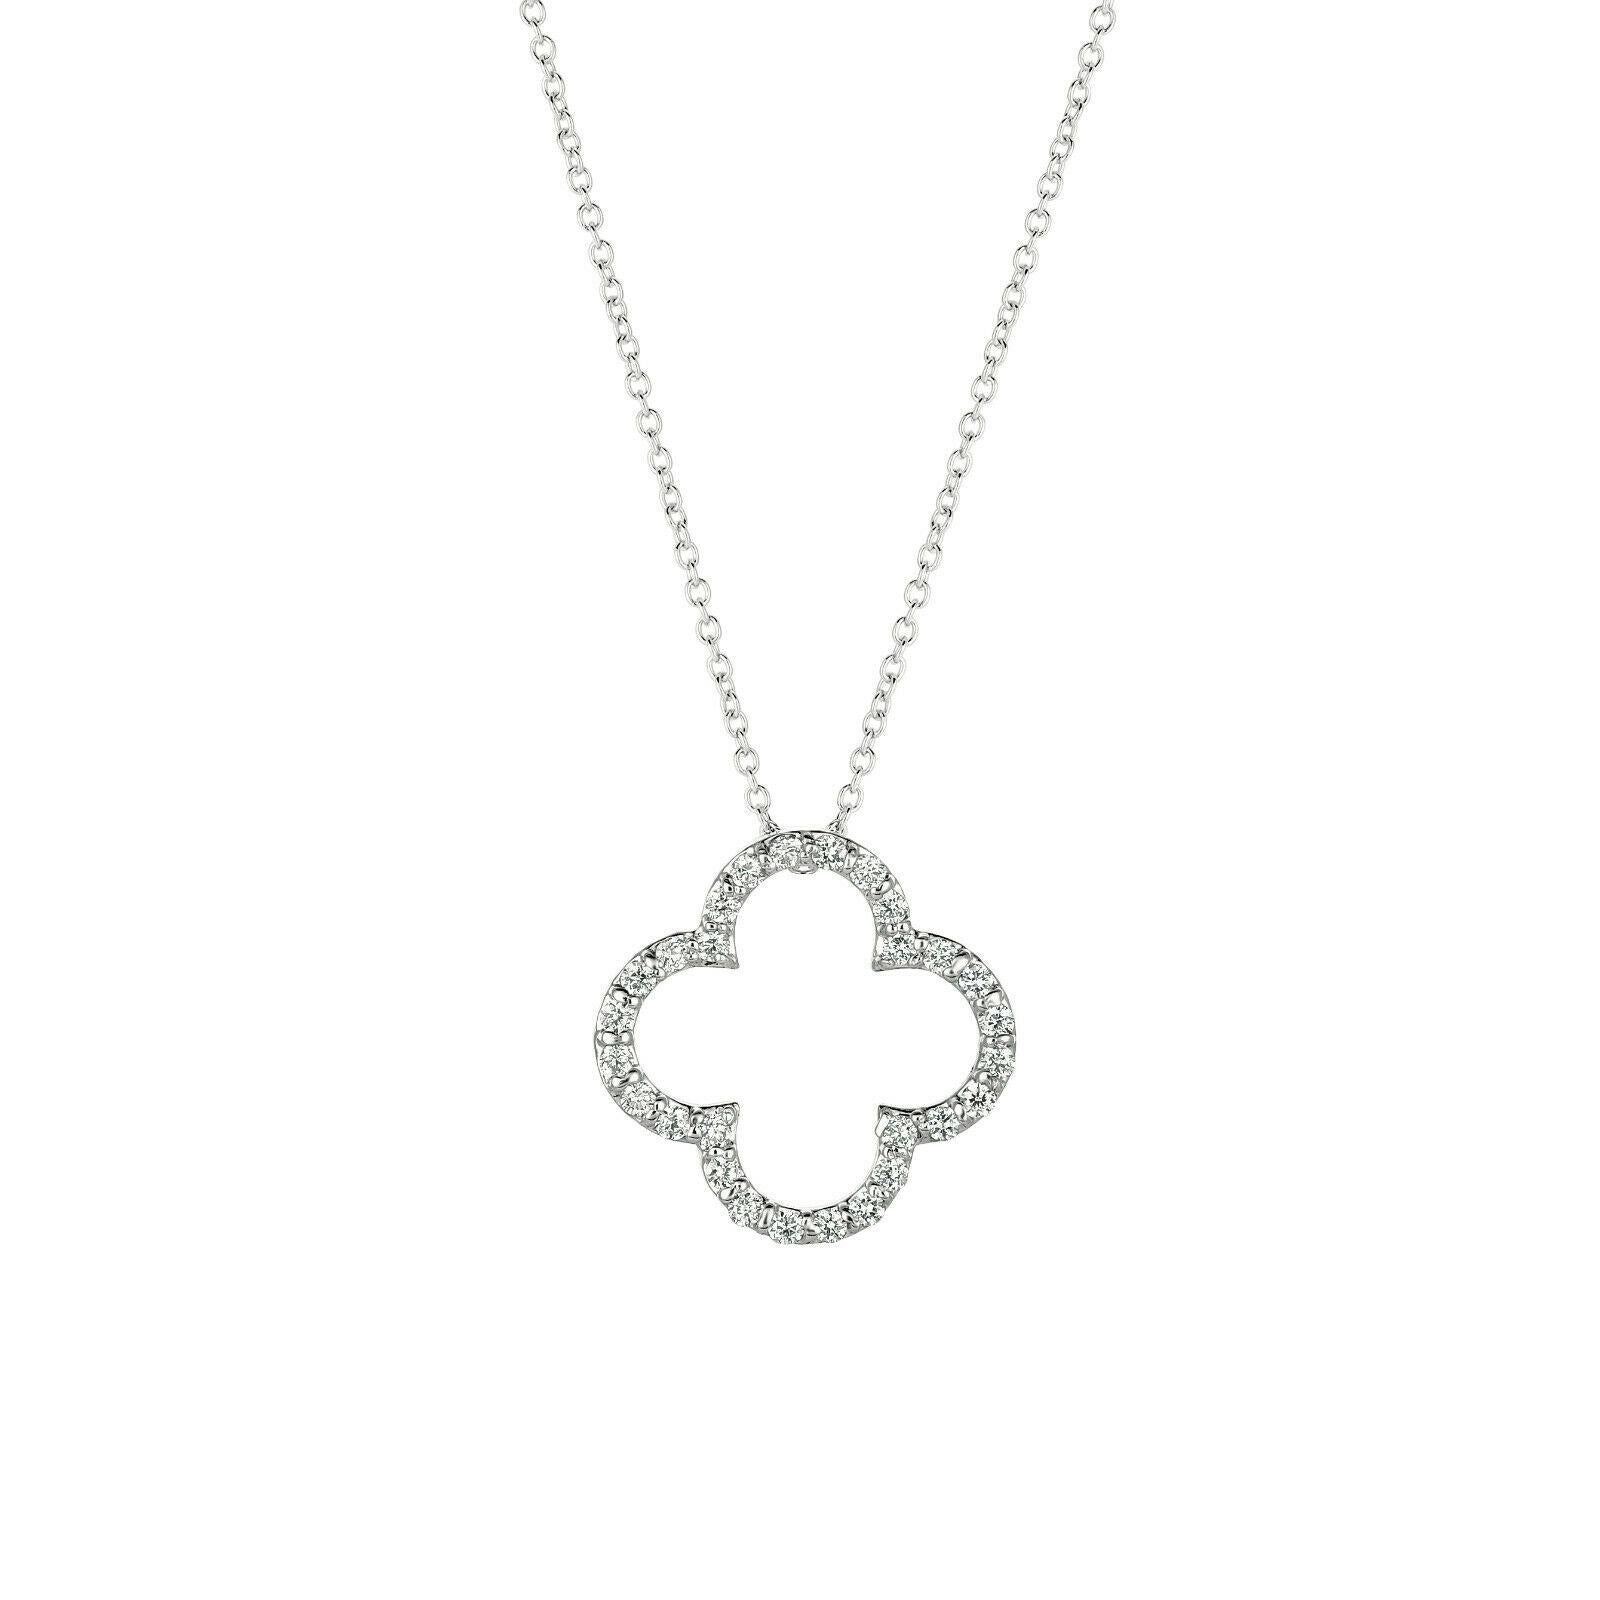 100% Natural Diamonds, Not Enhanced in any way Round Diamond Necklace with 18'' chain  
0.25CT
G-H 
SI  
14K White Gold,   Pave style, 1.7 gram
5/8 inch in height, 5/8 inch in width
28 diamonds

N5525.25W
ALL OUR ITEMS ARE AVAILABLE TO BE ORDERED IN